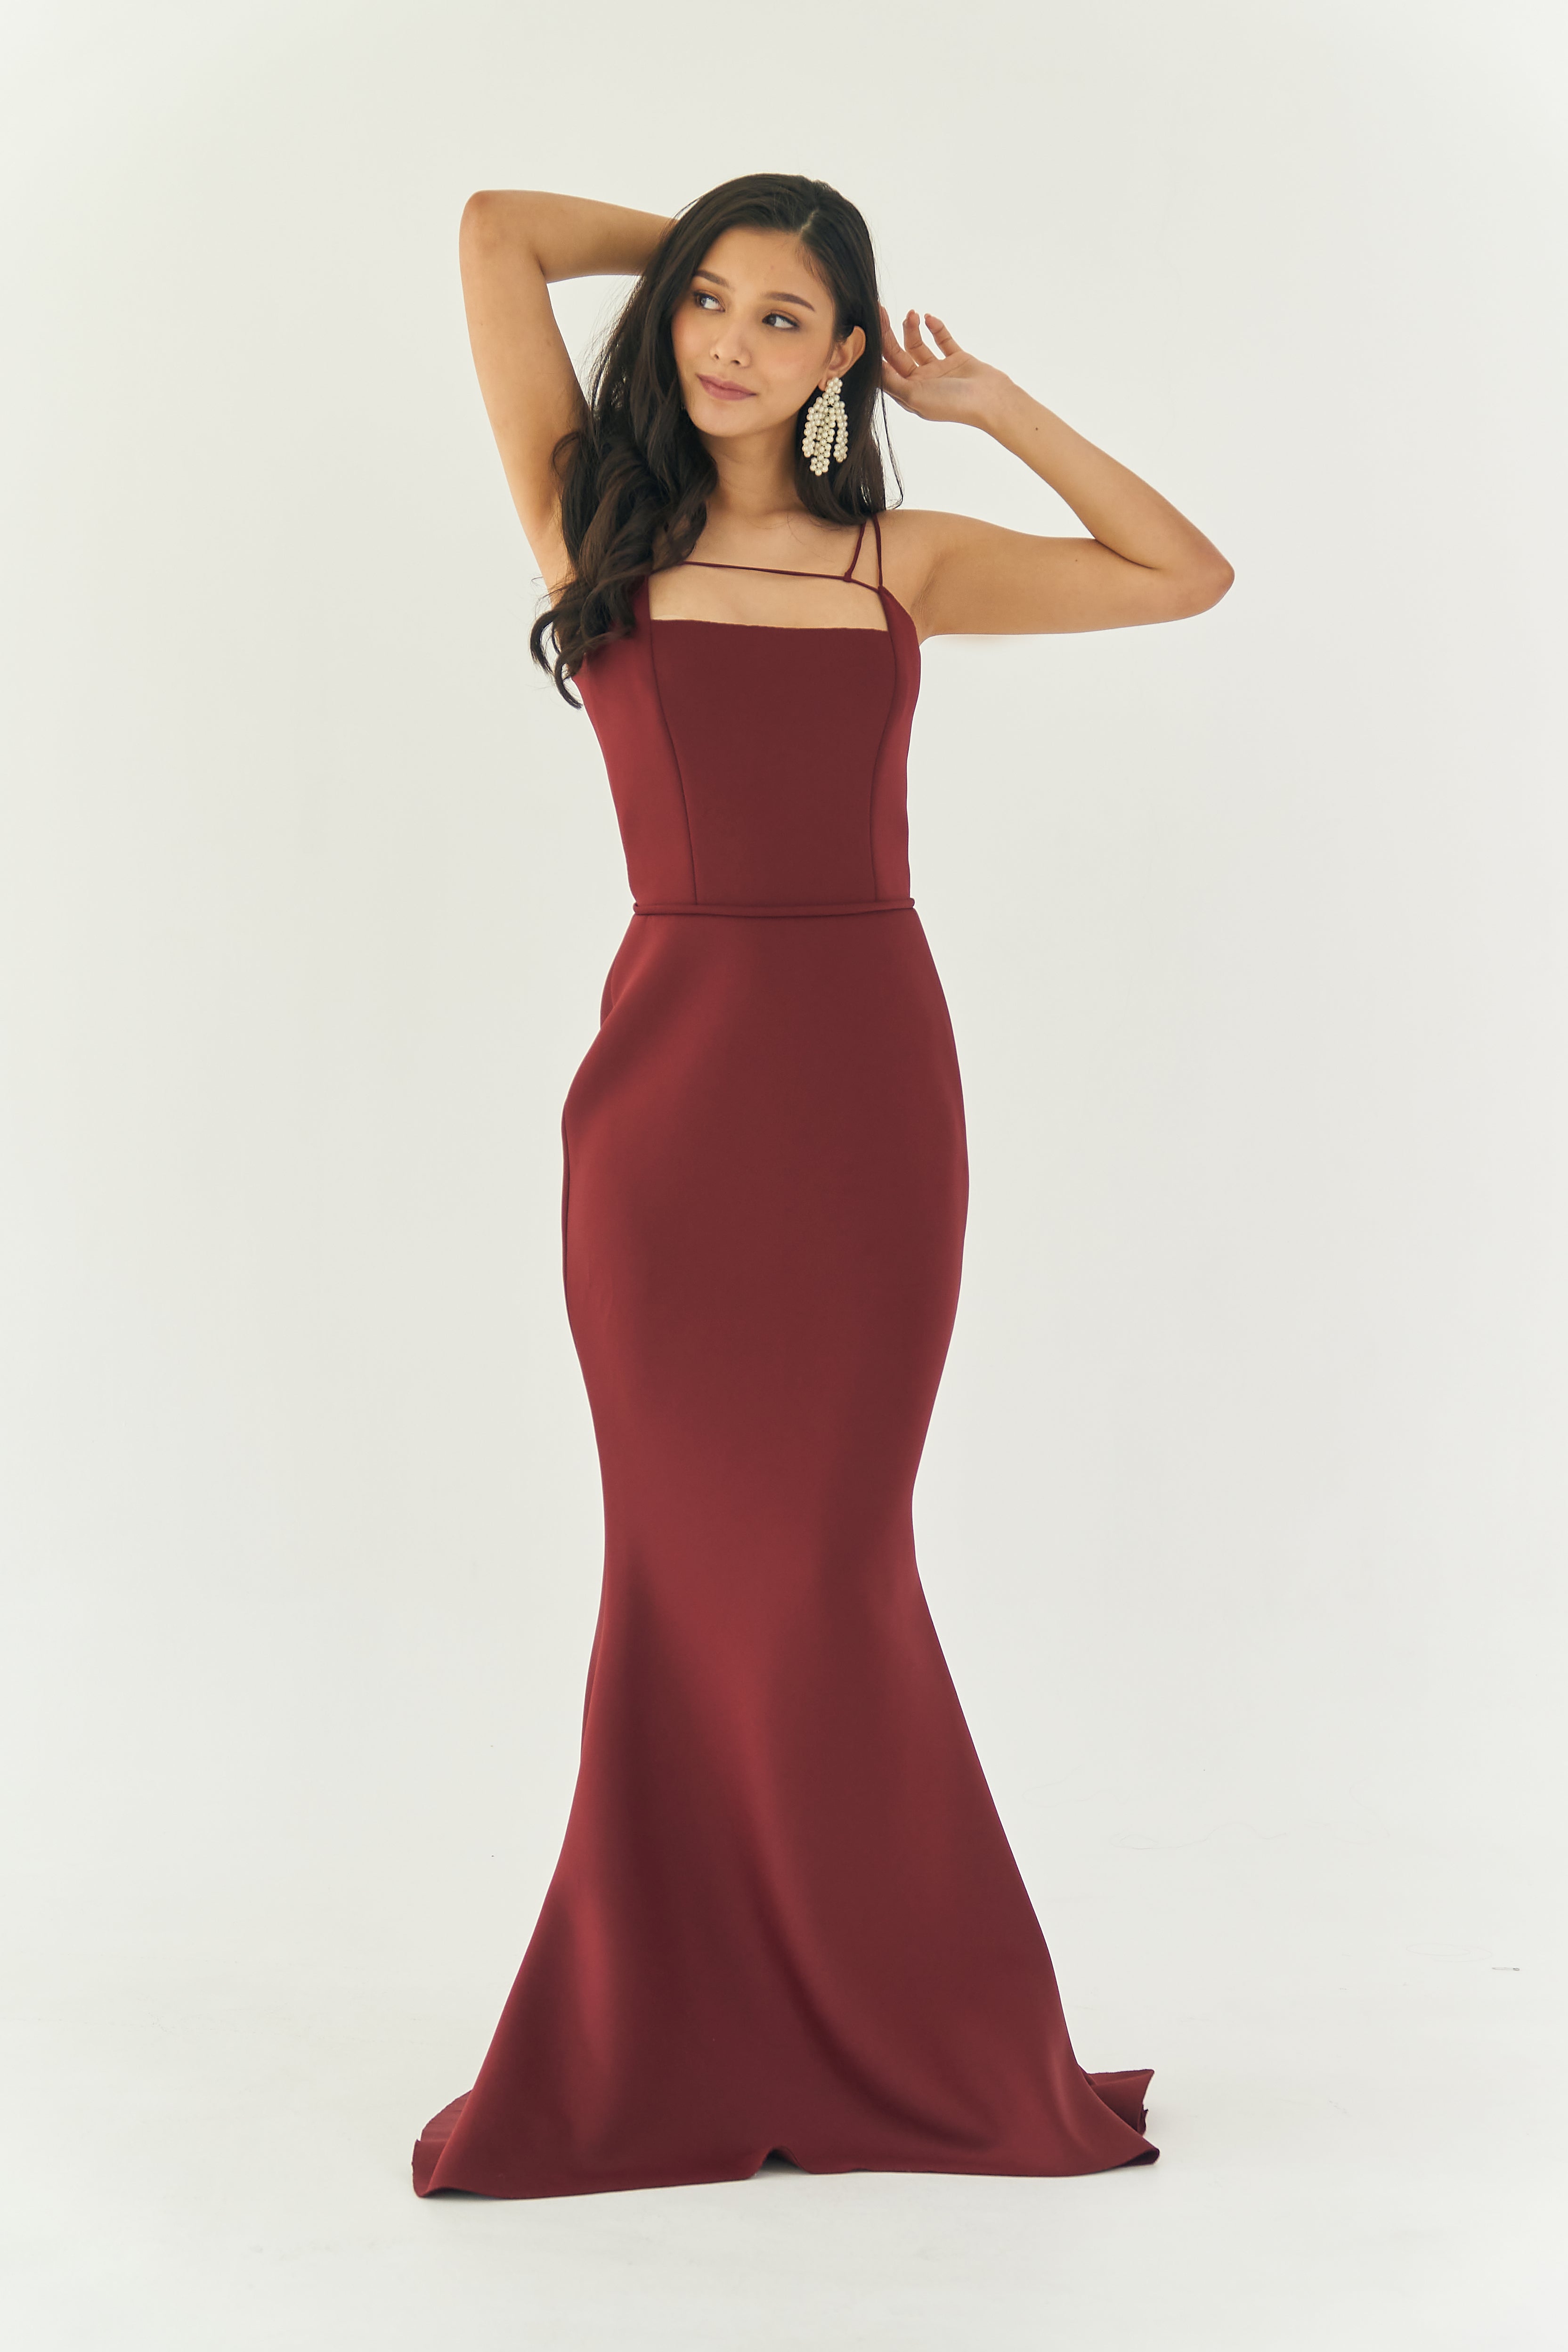 Strappy Red Neoprene Mermaid Gown